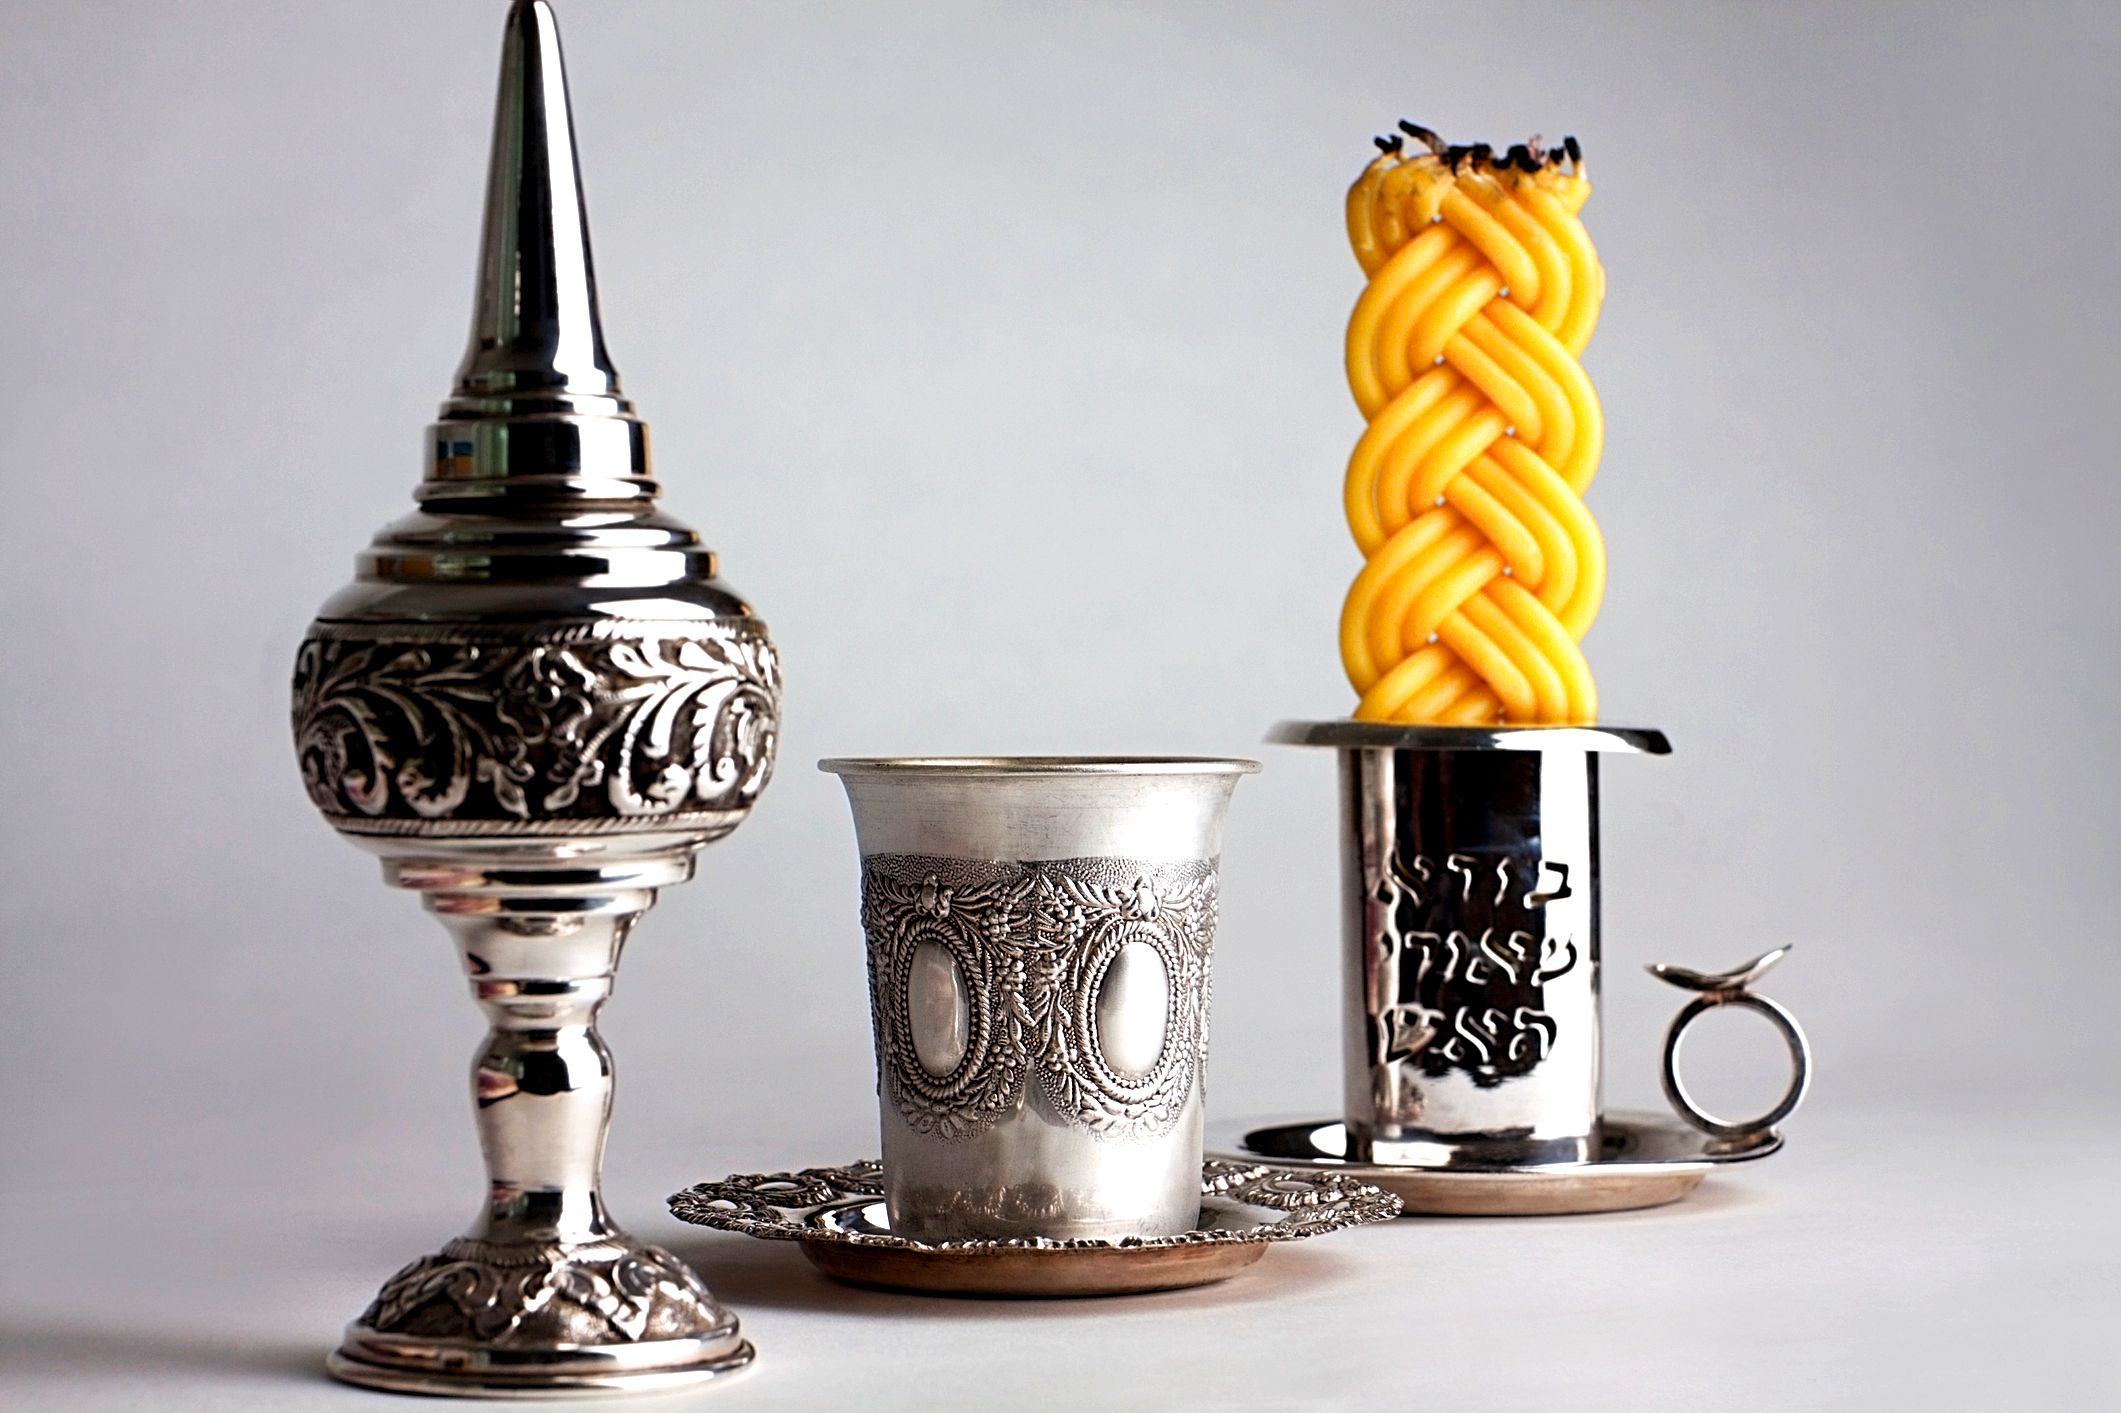 Havdalah set with kiddush cup, spice cup, and candle holder